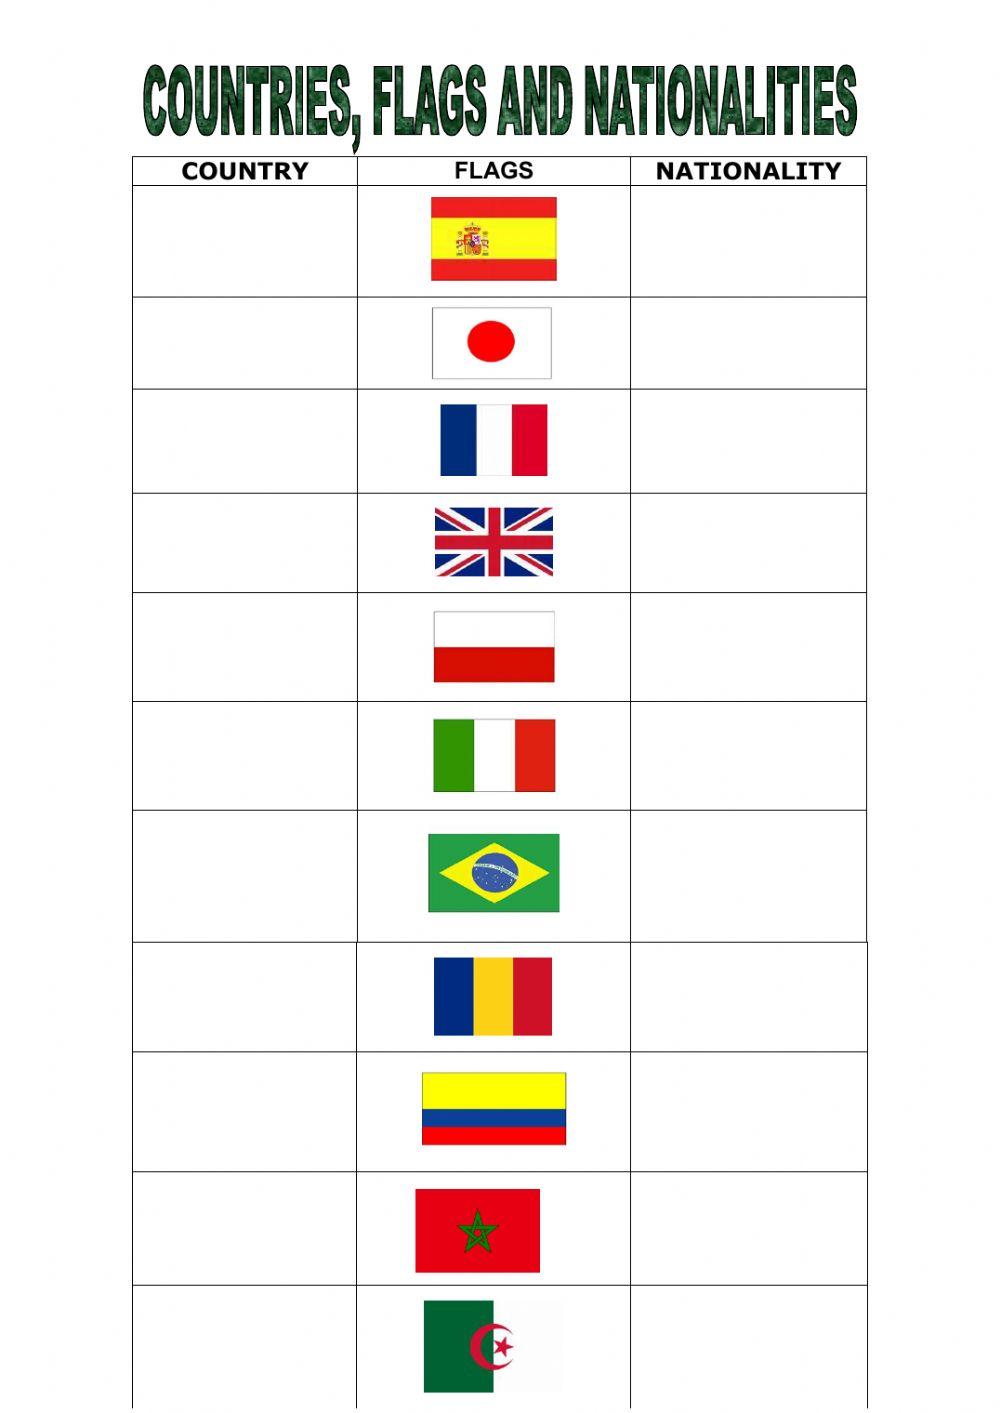 Countries, flags and nationalities